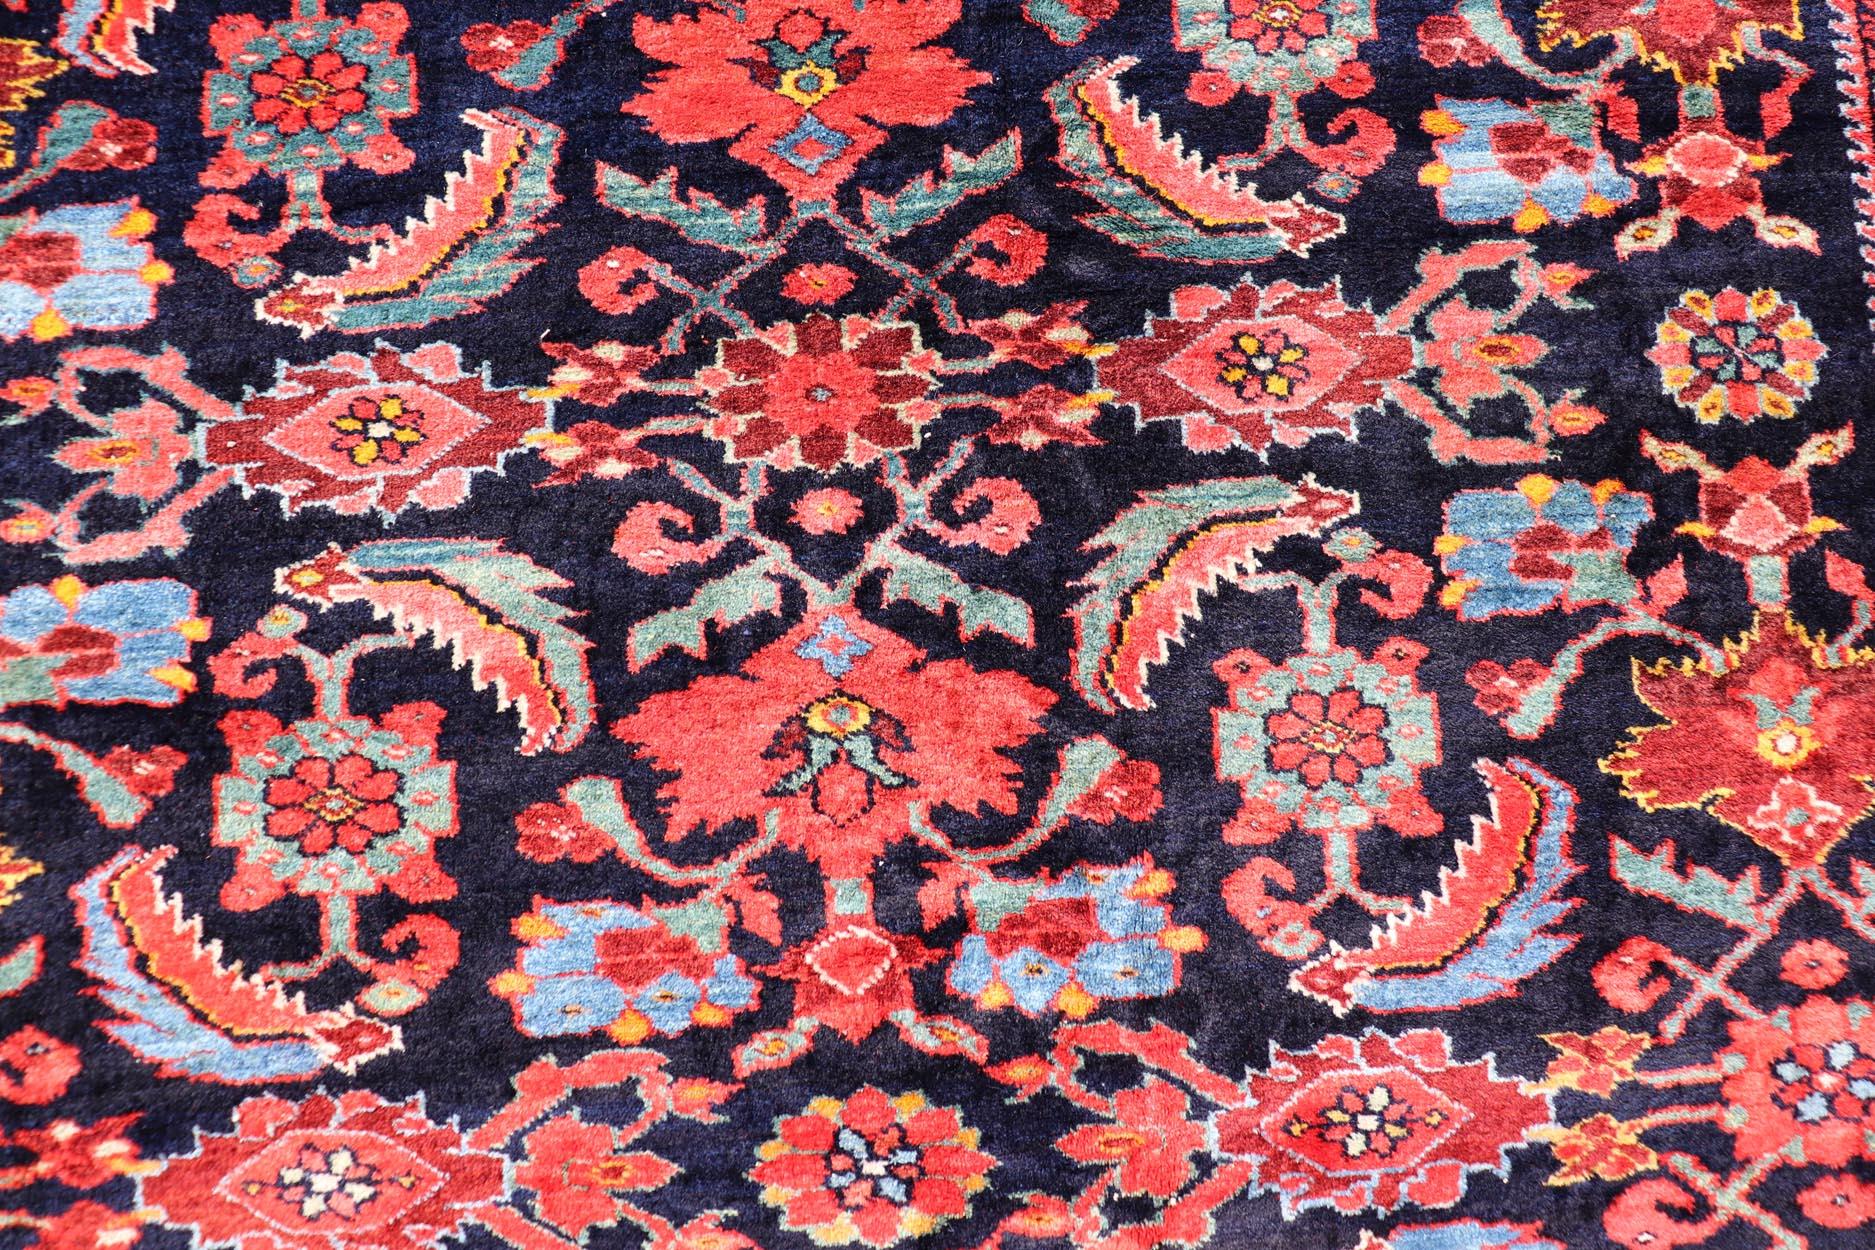 Antique Large Persian N.W. Carpet very finely woven and excellent pile and colors in Orange red, blue, ivory. Keivan Woven Arts / rug/ W22-1005 , country of origin / type: Iran / N.W. very fine weave Malayer type, circa 1910.

Measures: 12.7 x